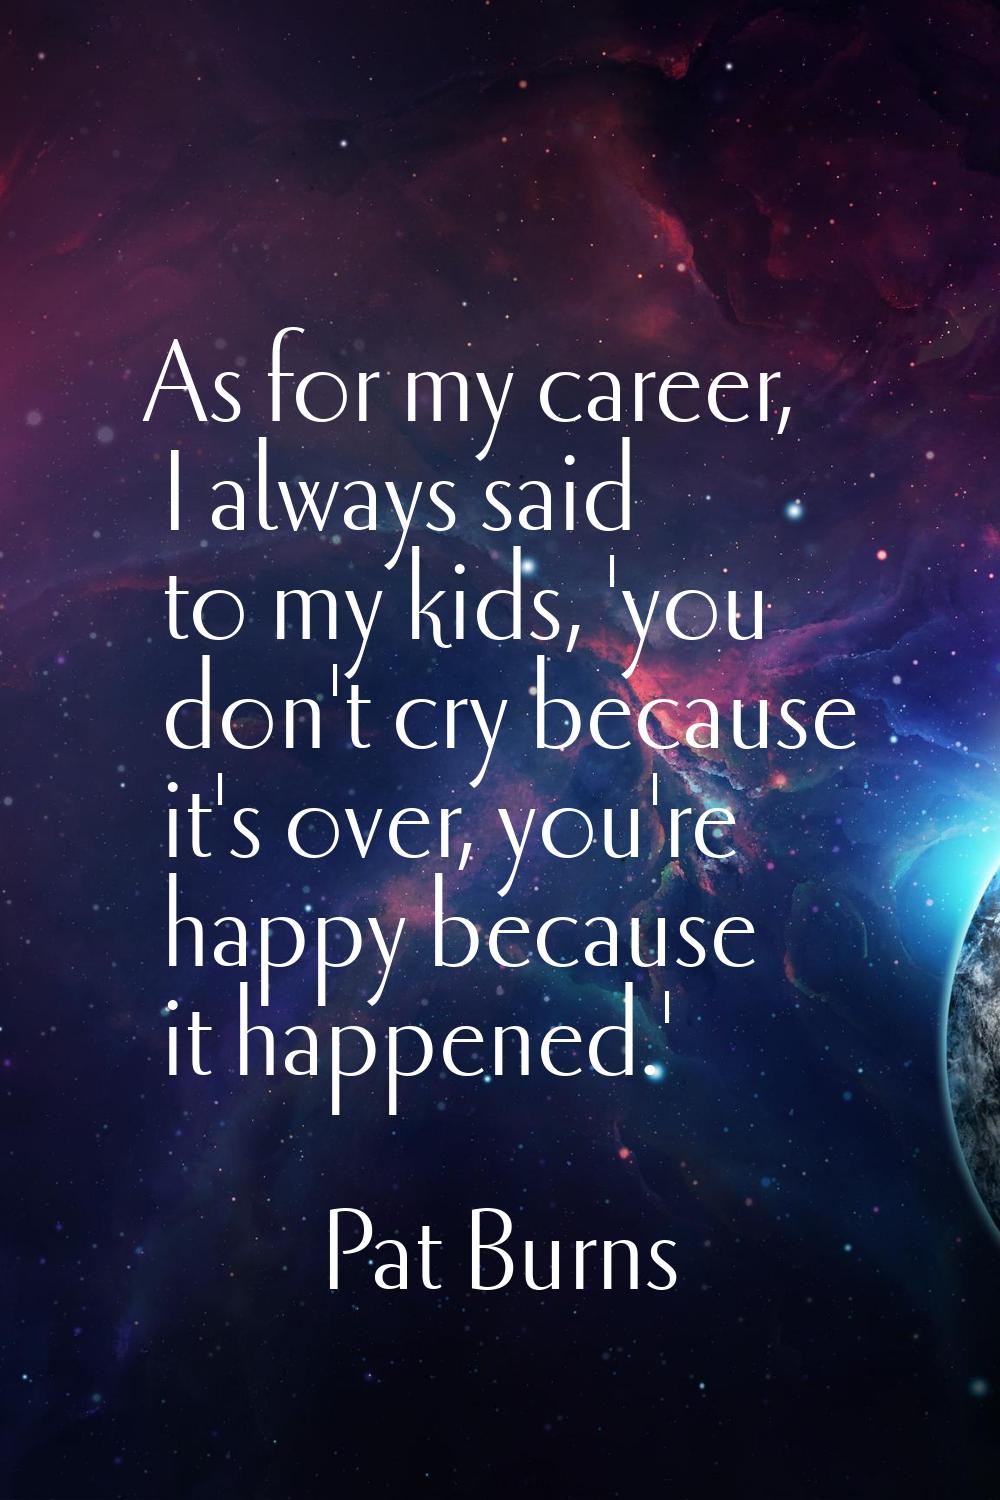 As for my career, I always said to my kids, 'you don't cry because it's over, you're happy because 